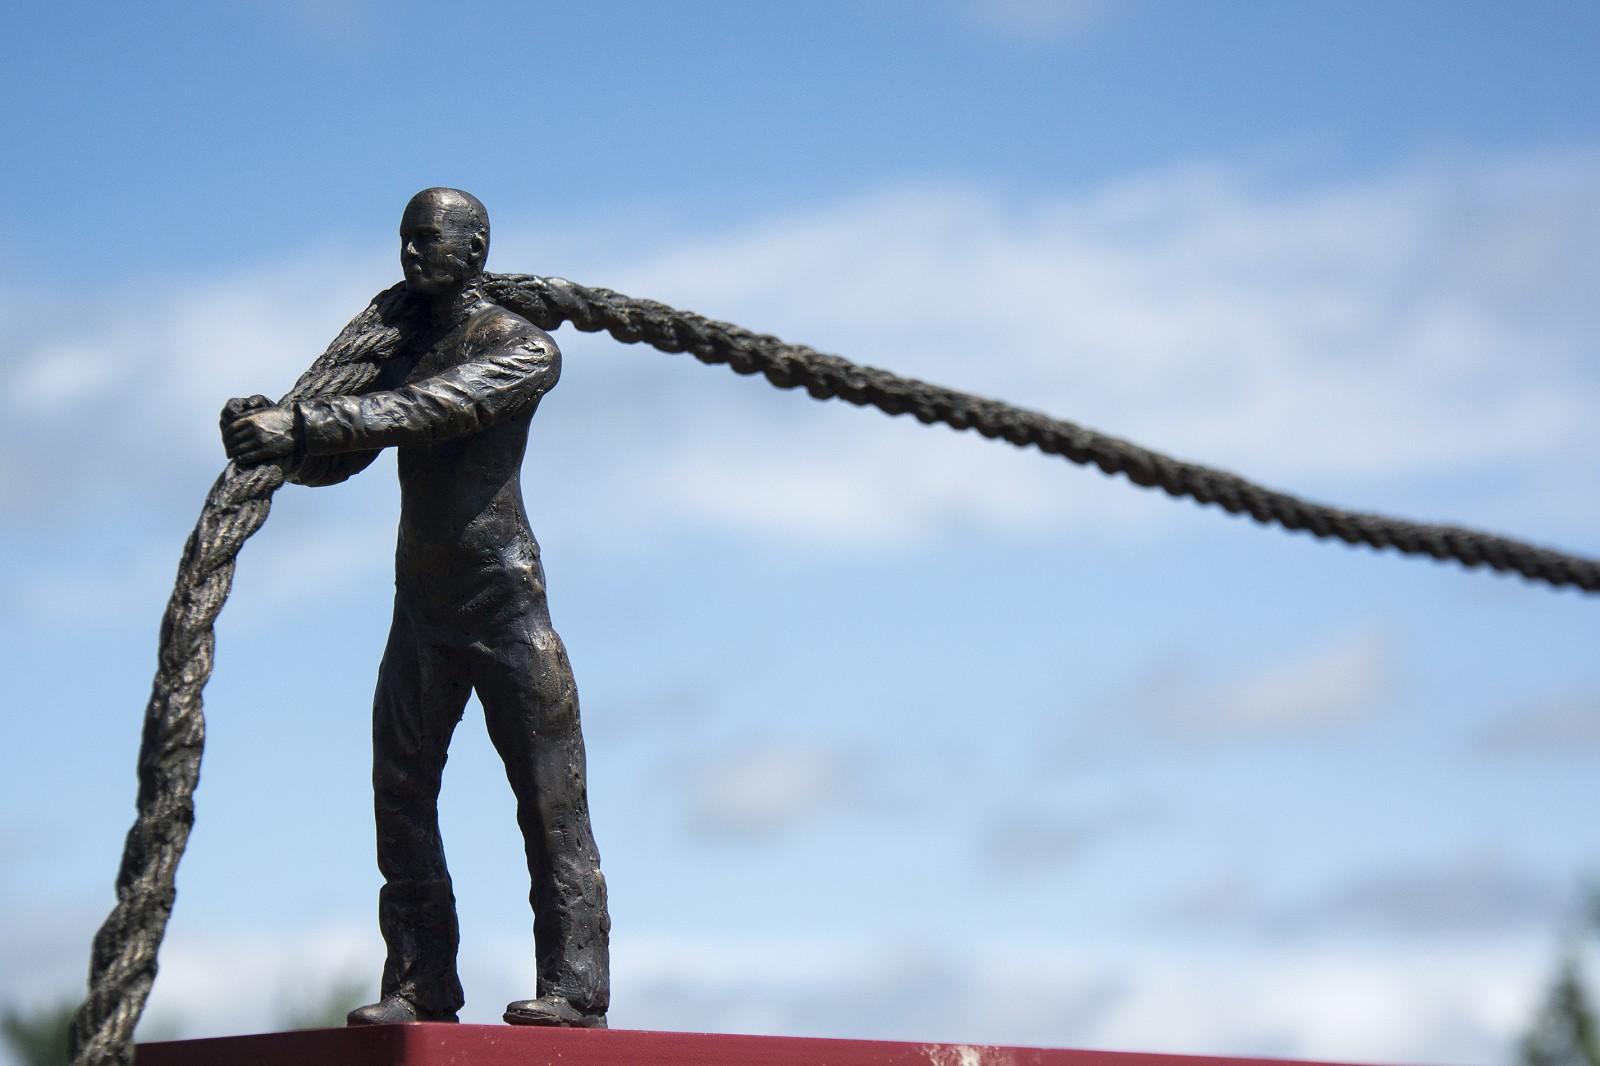 Bronze cast figurines of two men, one at each at end of a bronze rope, standing on a teeter totter  -- one man merely holds his end of the rope, the other one pulls. The whole is balanced on a black steel upright pipe. Play and playfulness are at